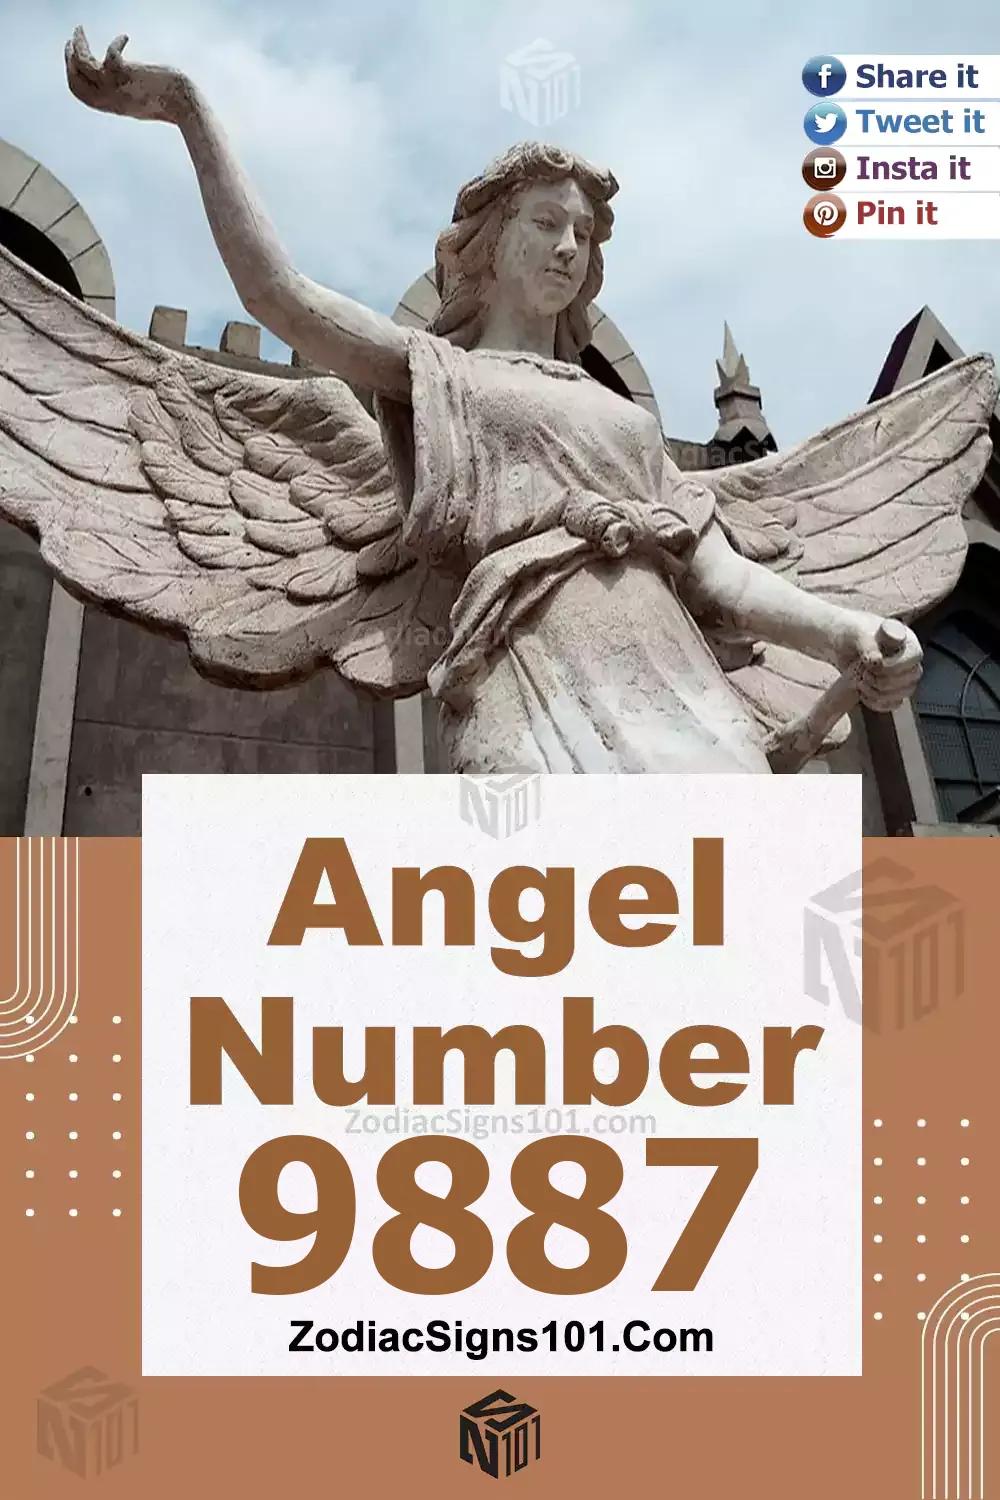 9887 Angel Number Meaning